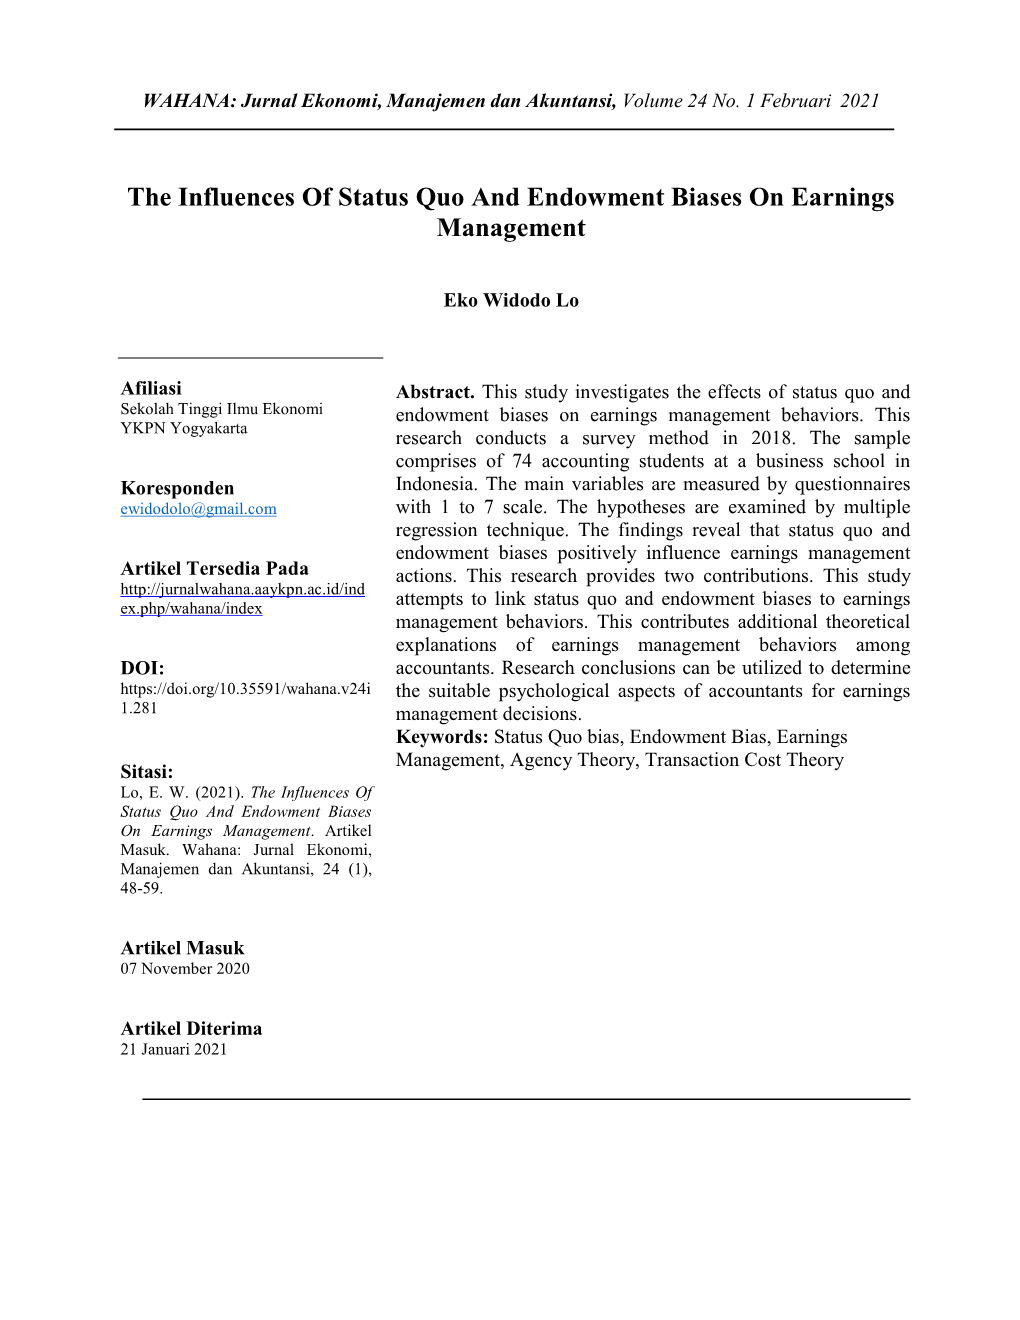 The Influence of Status Quo Bias and Endowment Bias on Earnings